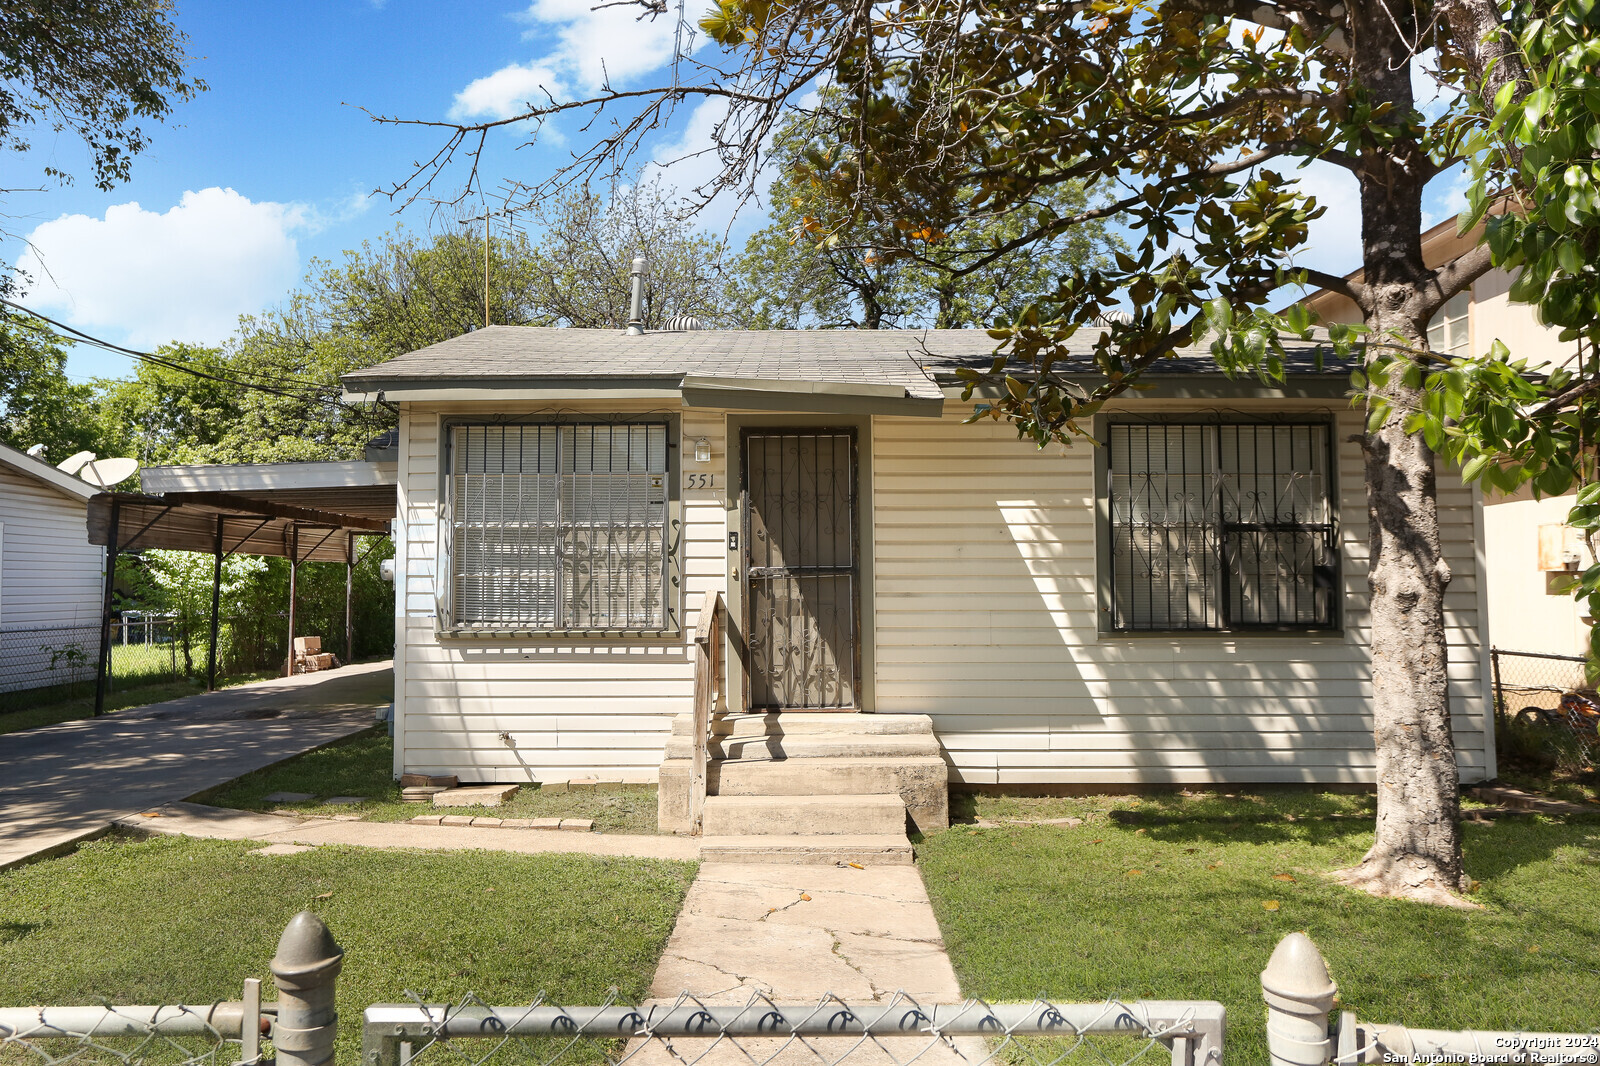 Photo of 551 Fitch St in San Antonio, TX